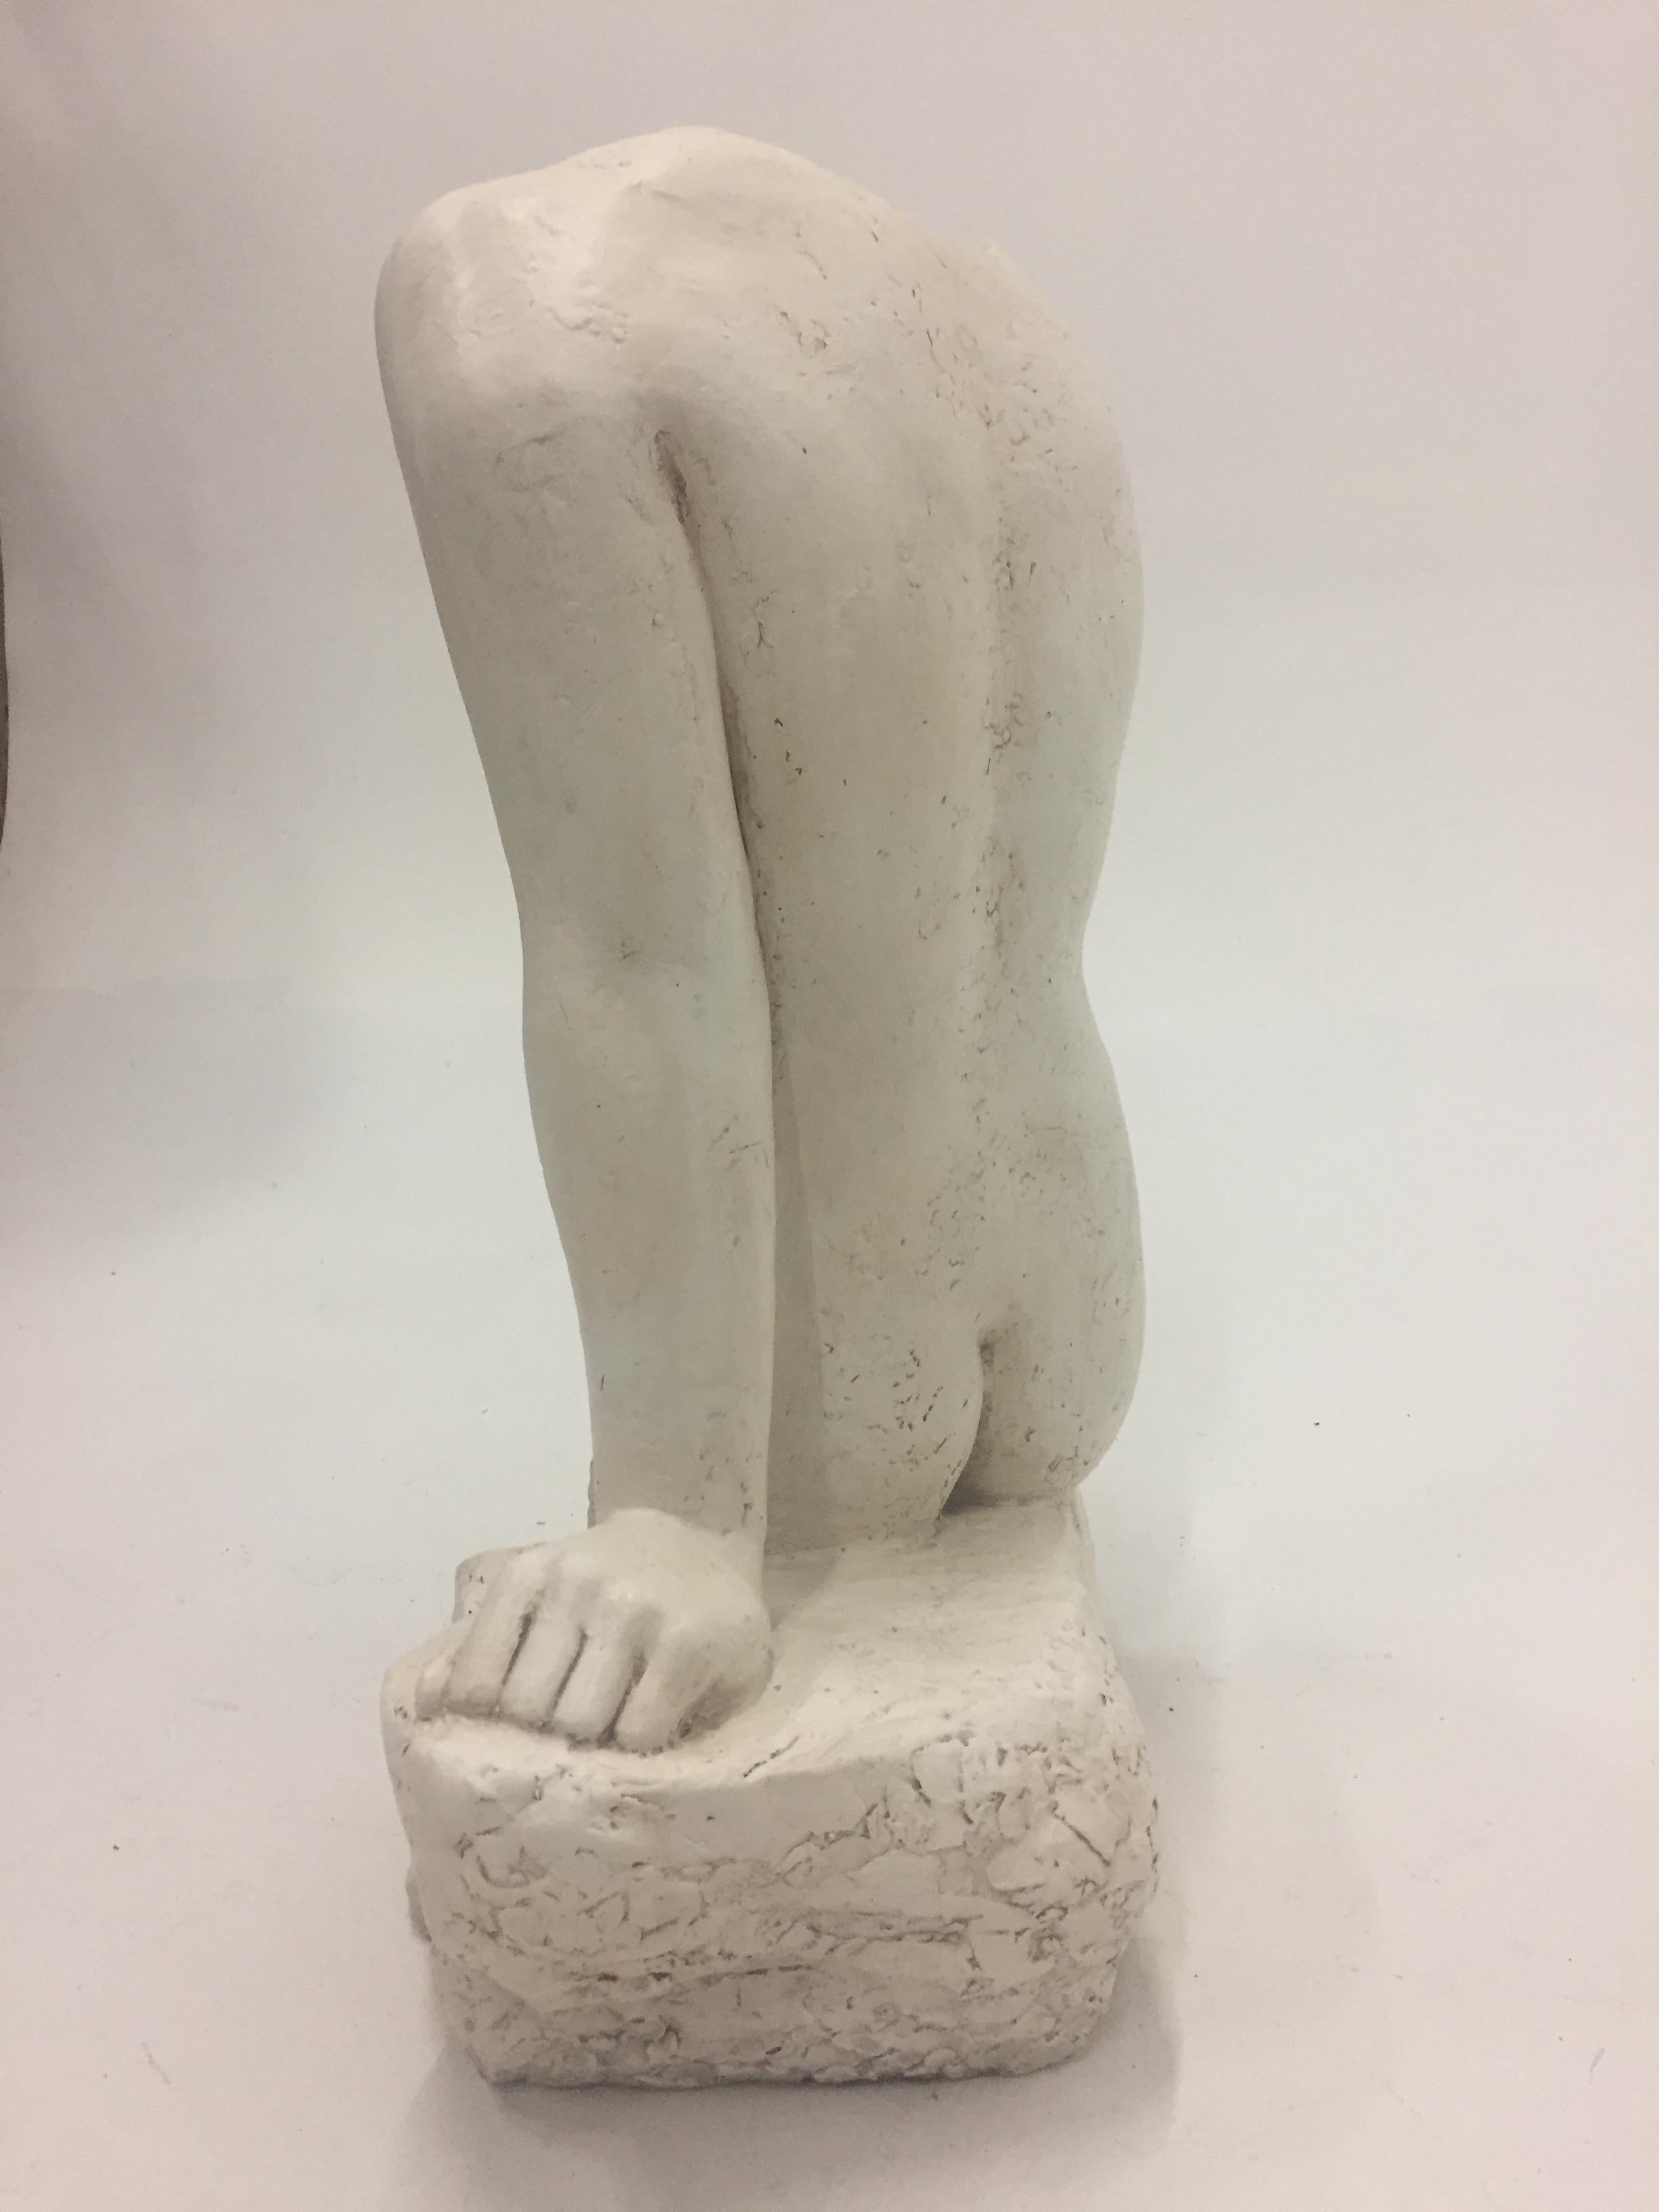 A gorgeous plaster nude torso on wooden plinth by Pennsylvania renowned sculptor Charles Rudy who worked in similar style to Rodin.
Purposely rough on alternate side.
Signed C Rudy 1940 on back.